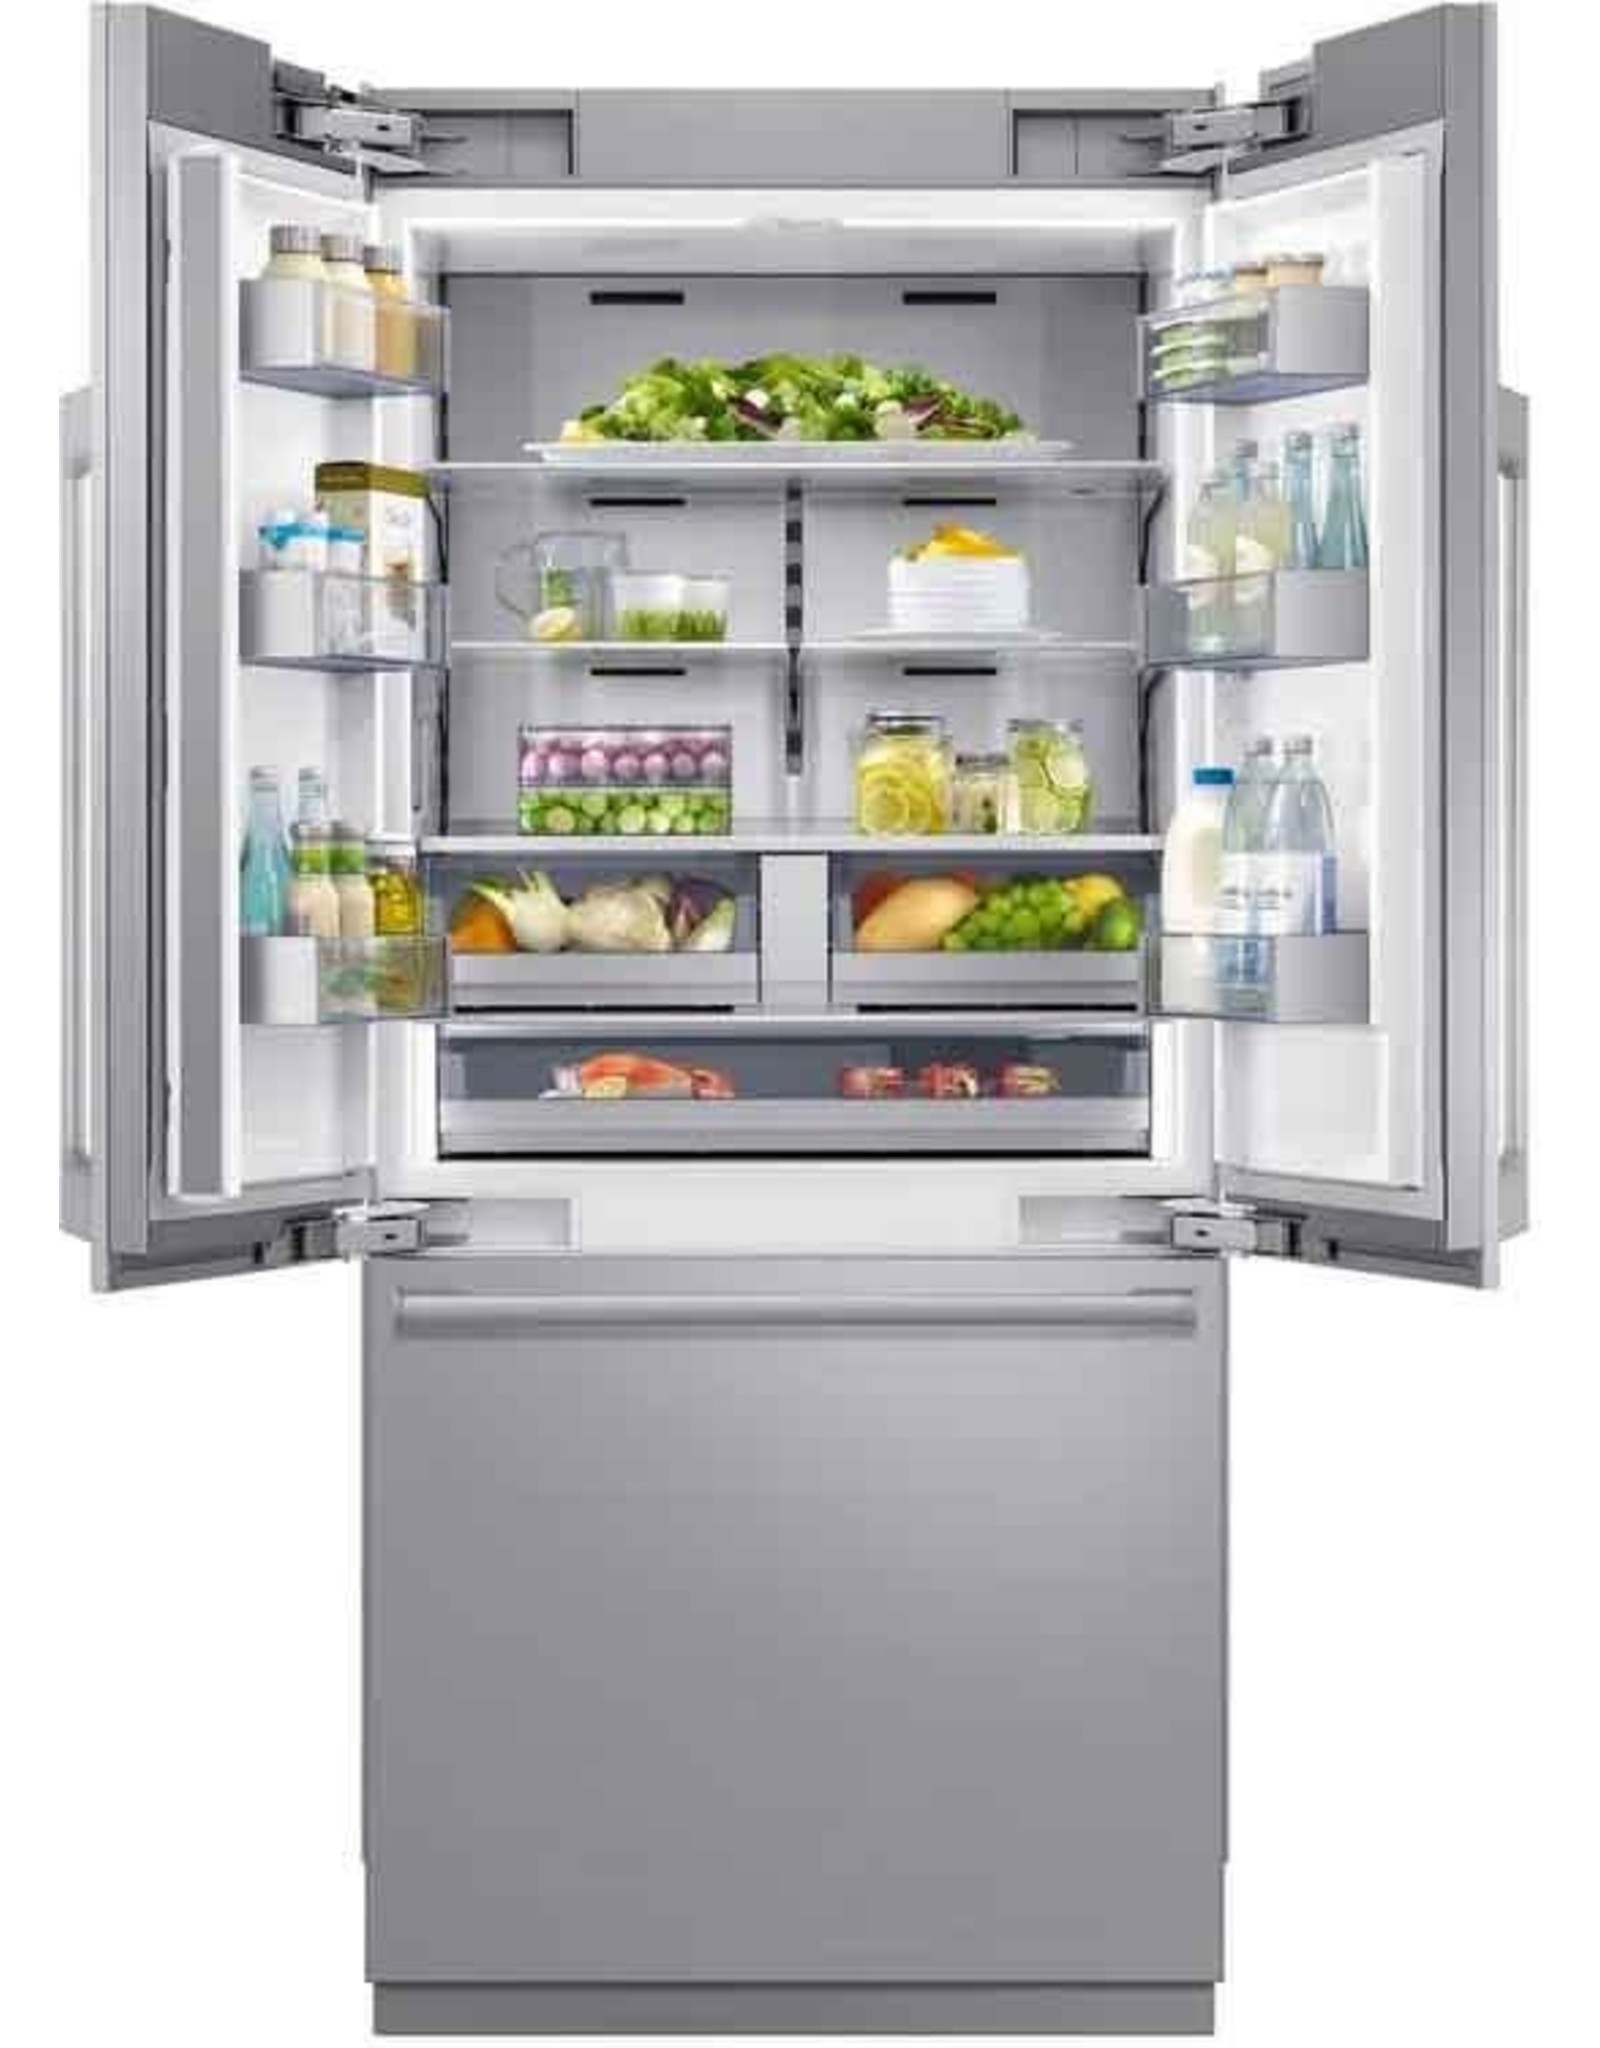 Whirlpool 25.2-cu ft French Door Refrigerator with Ice Maker (Fingerprint Resistant Stainless Steel) ENERGY STAR